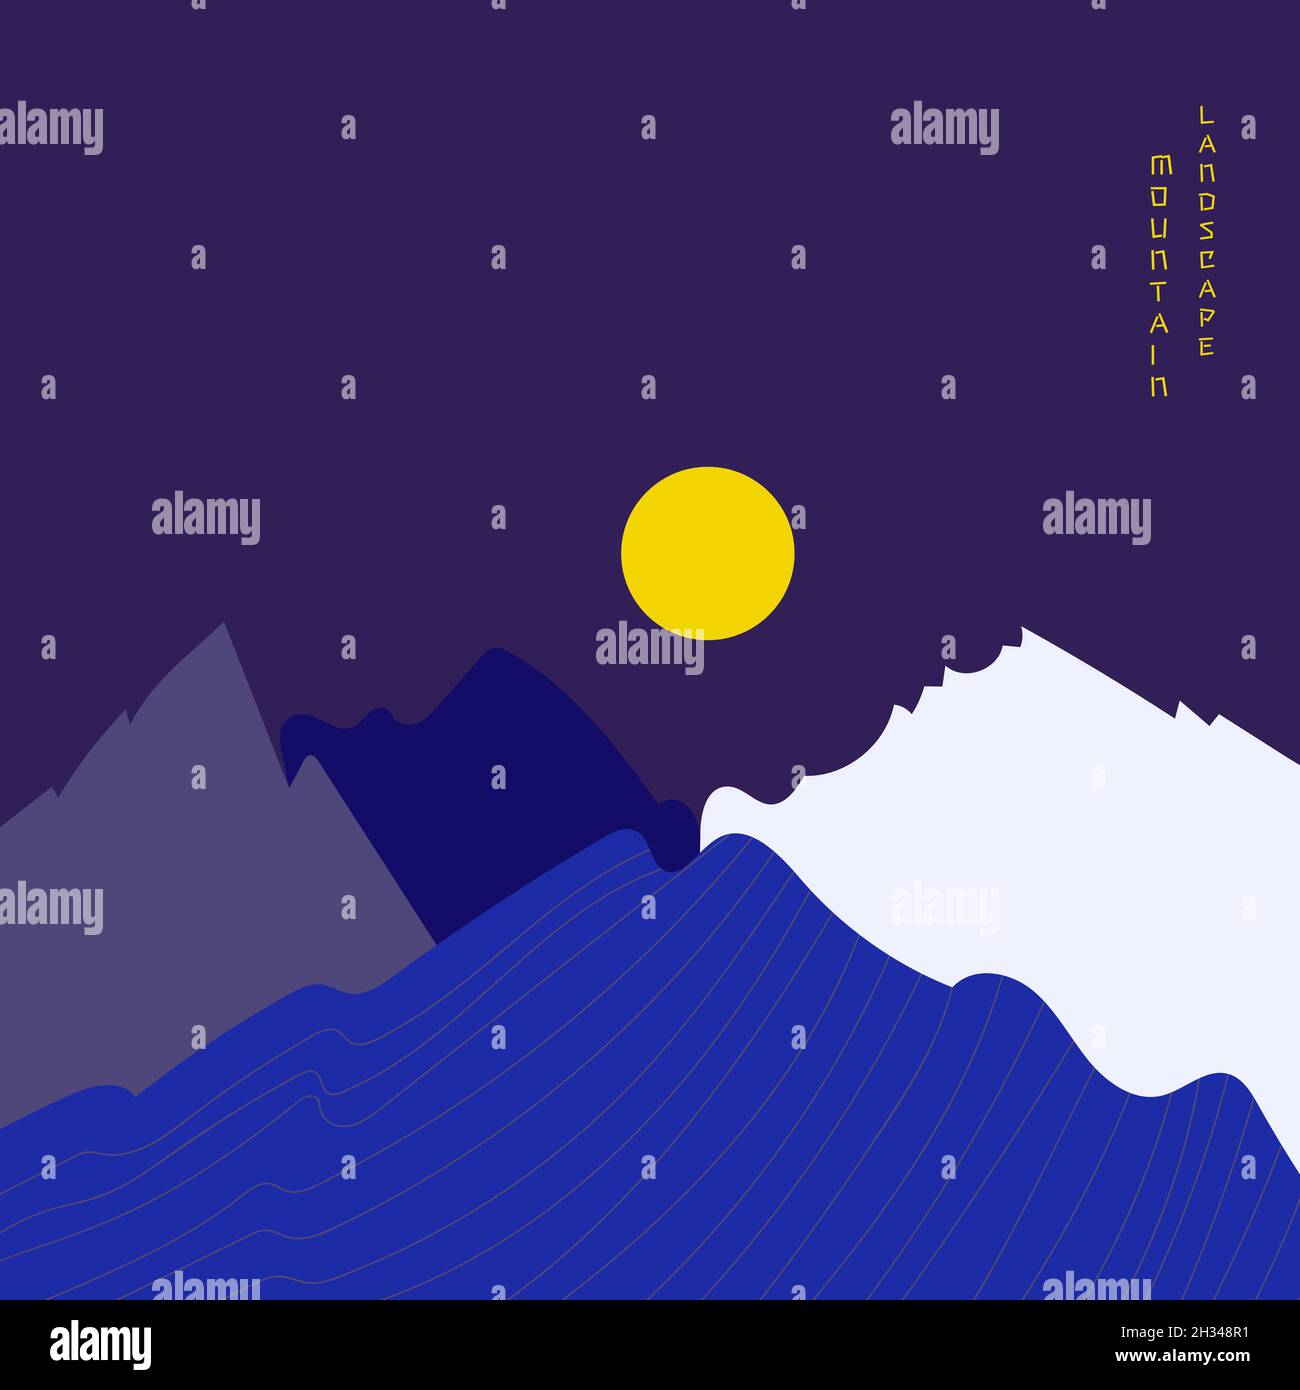 Graphic night mountain landscape poster. Geometric landscape background in asian japanese style.  Stock Vector